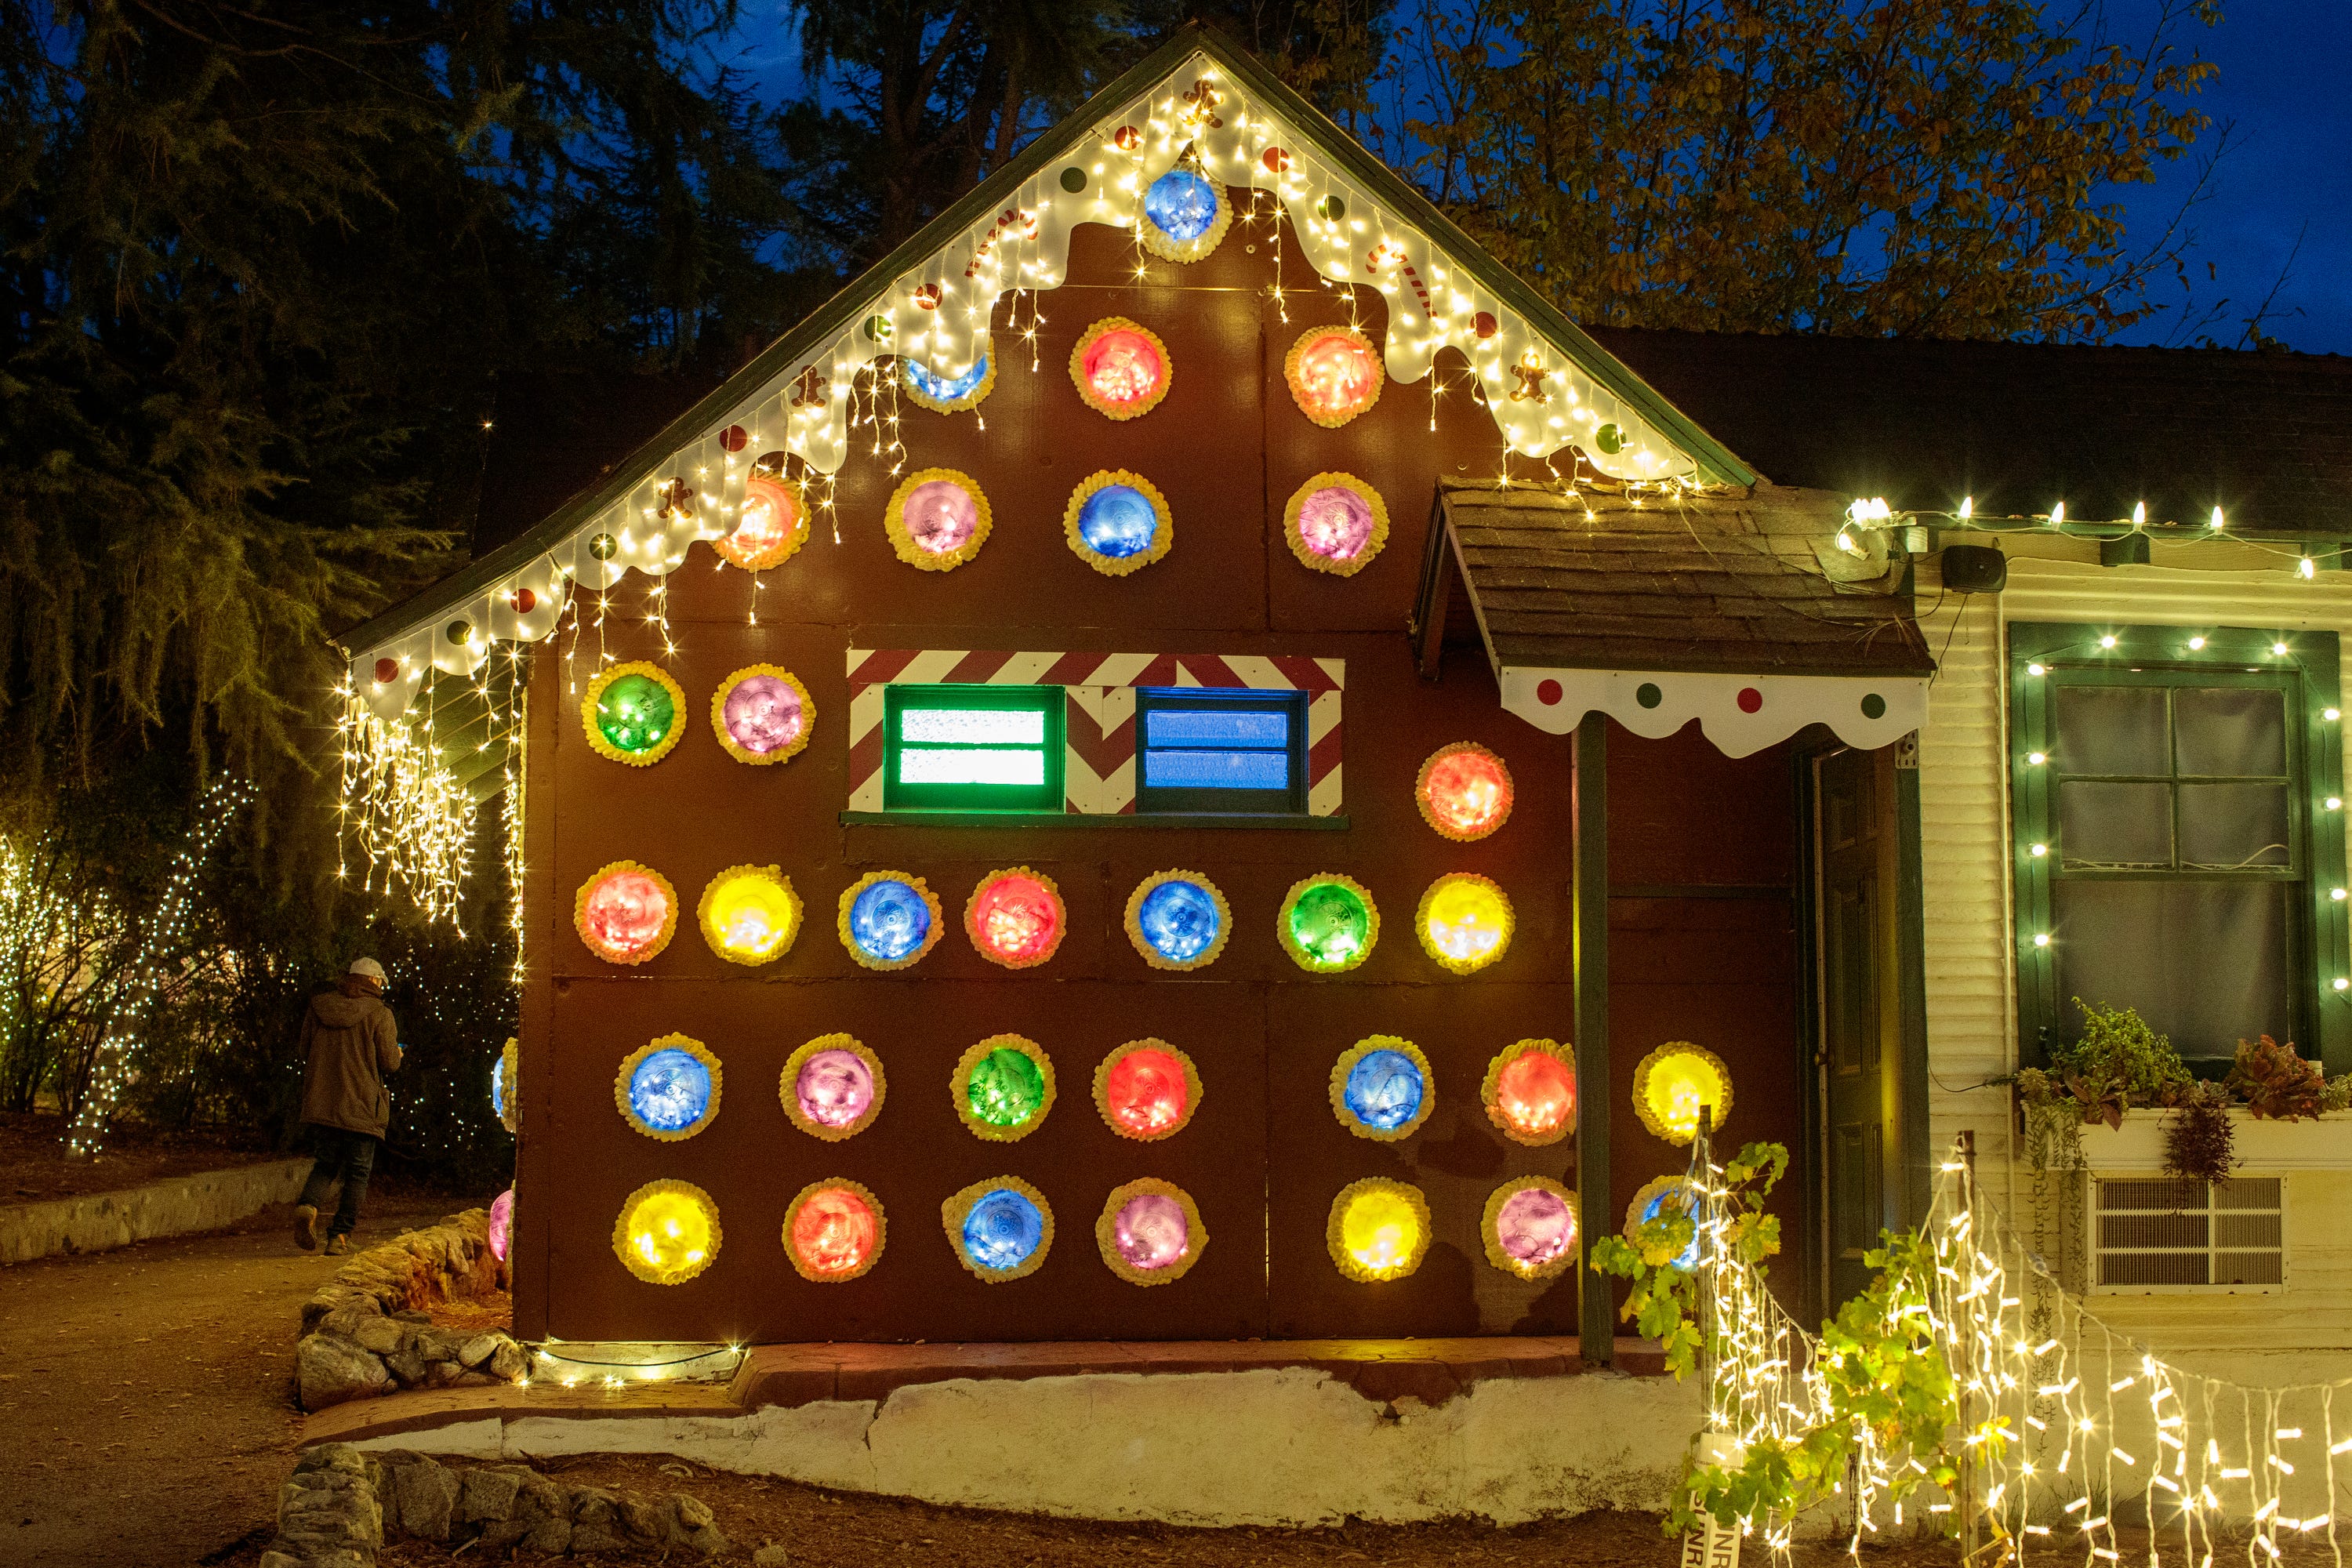 Buildings are decorated during the Christmas Nights festival at 123 Farm in Beaumont, Calif., on Monday, Dec. 5, 2022.